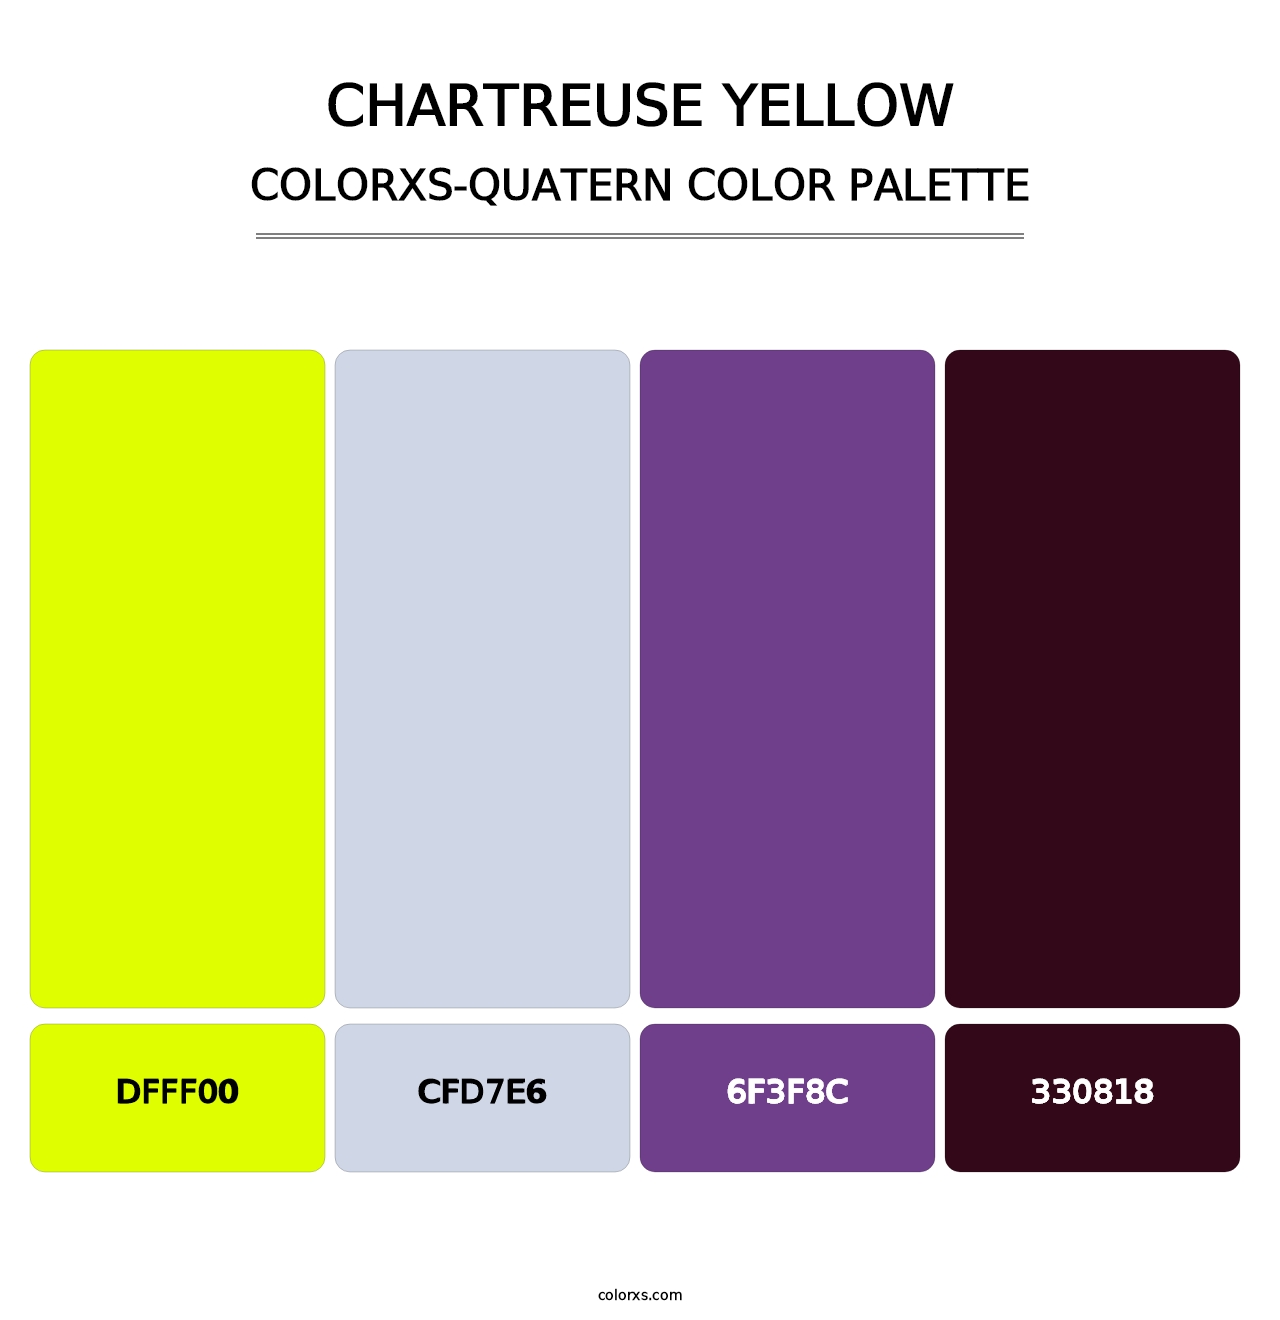 Chartreuse Yellow - Colorxs Quatern Palette